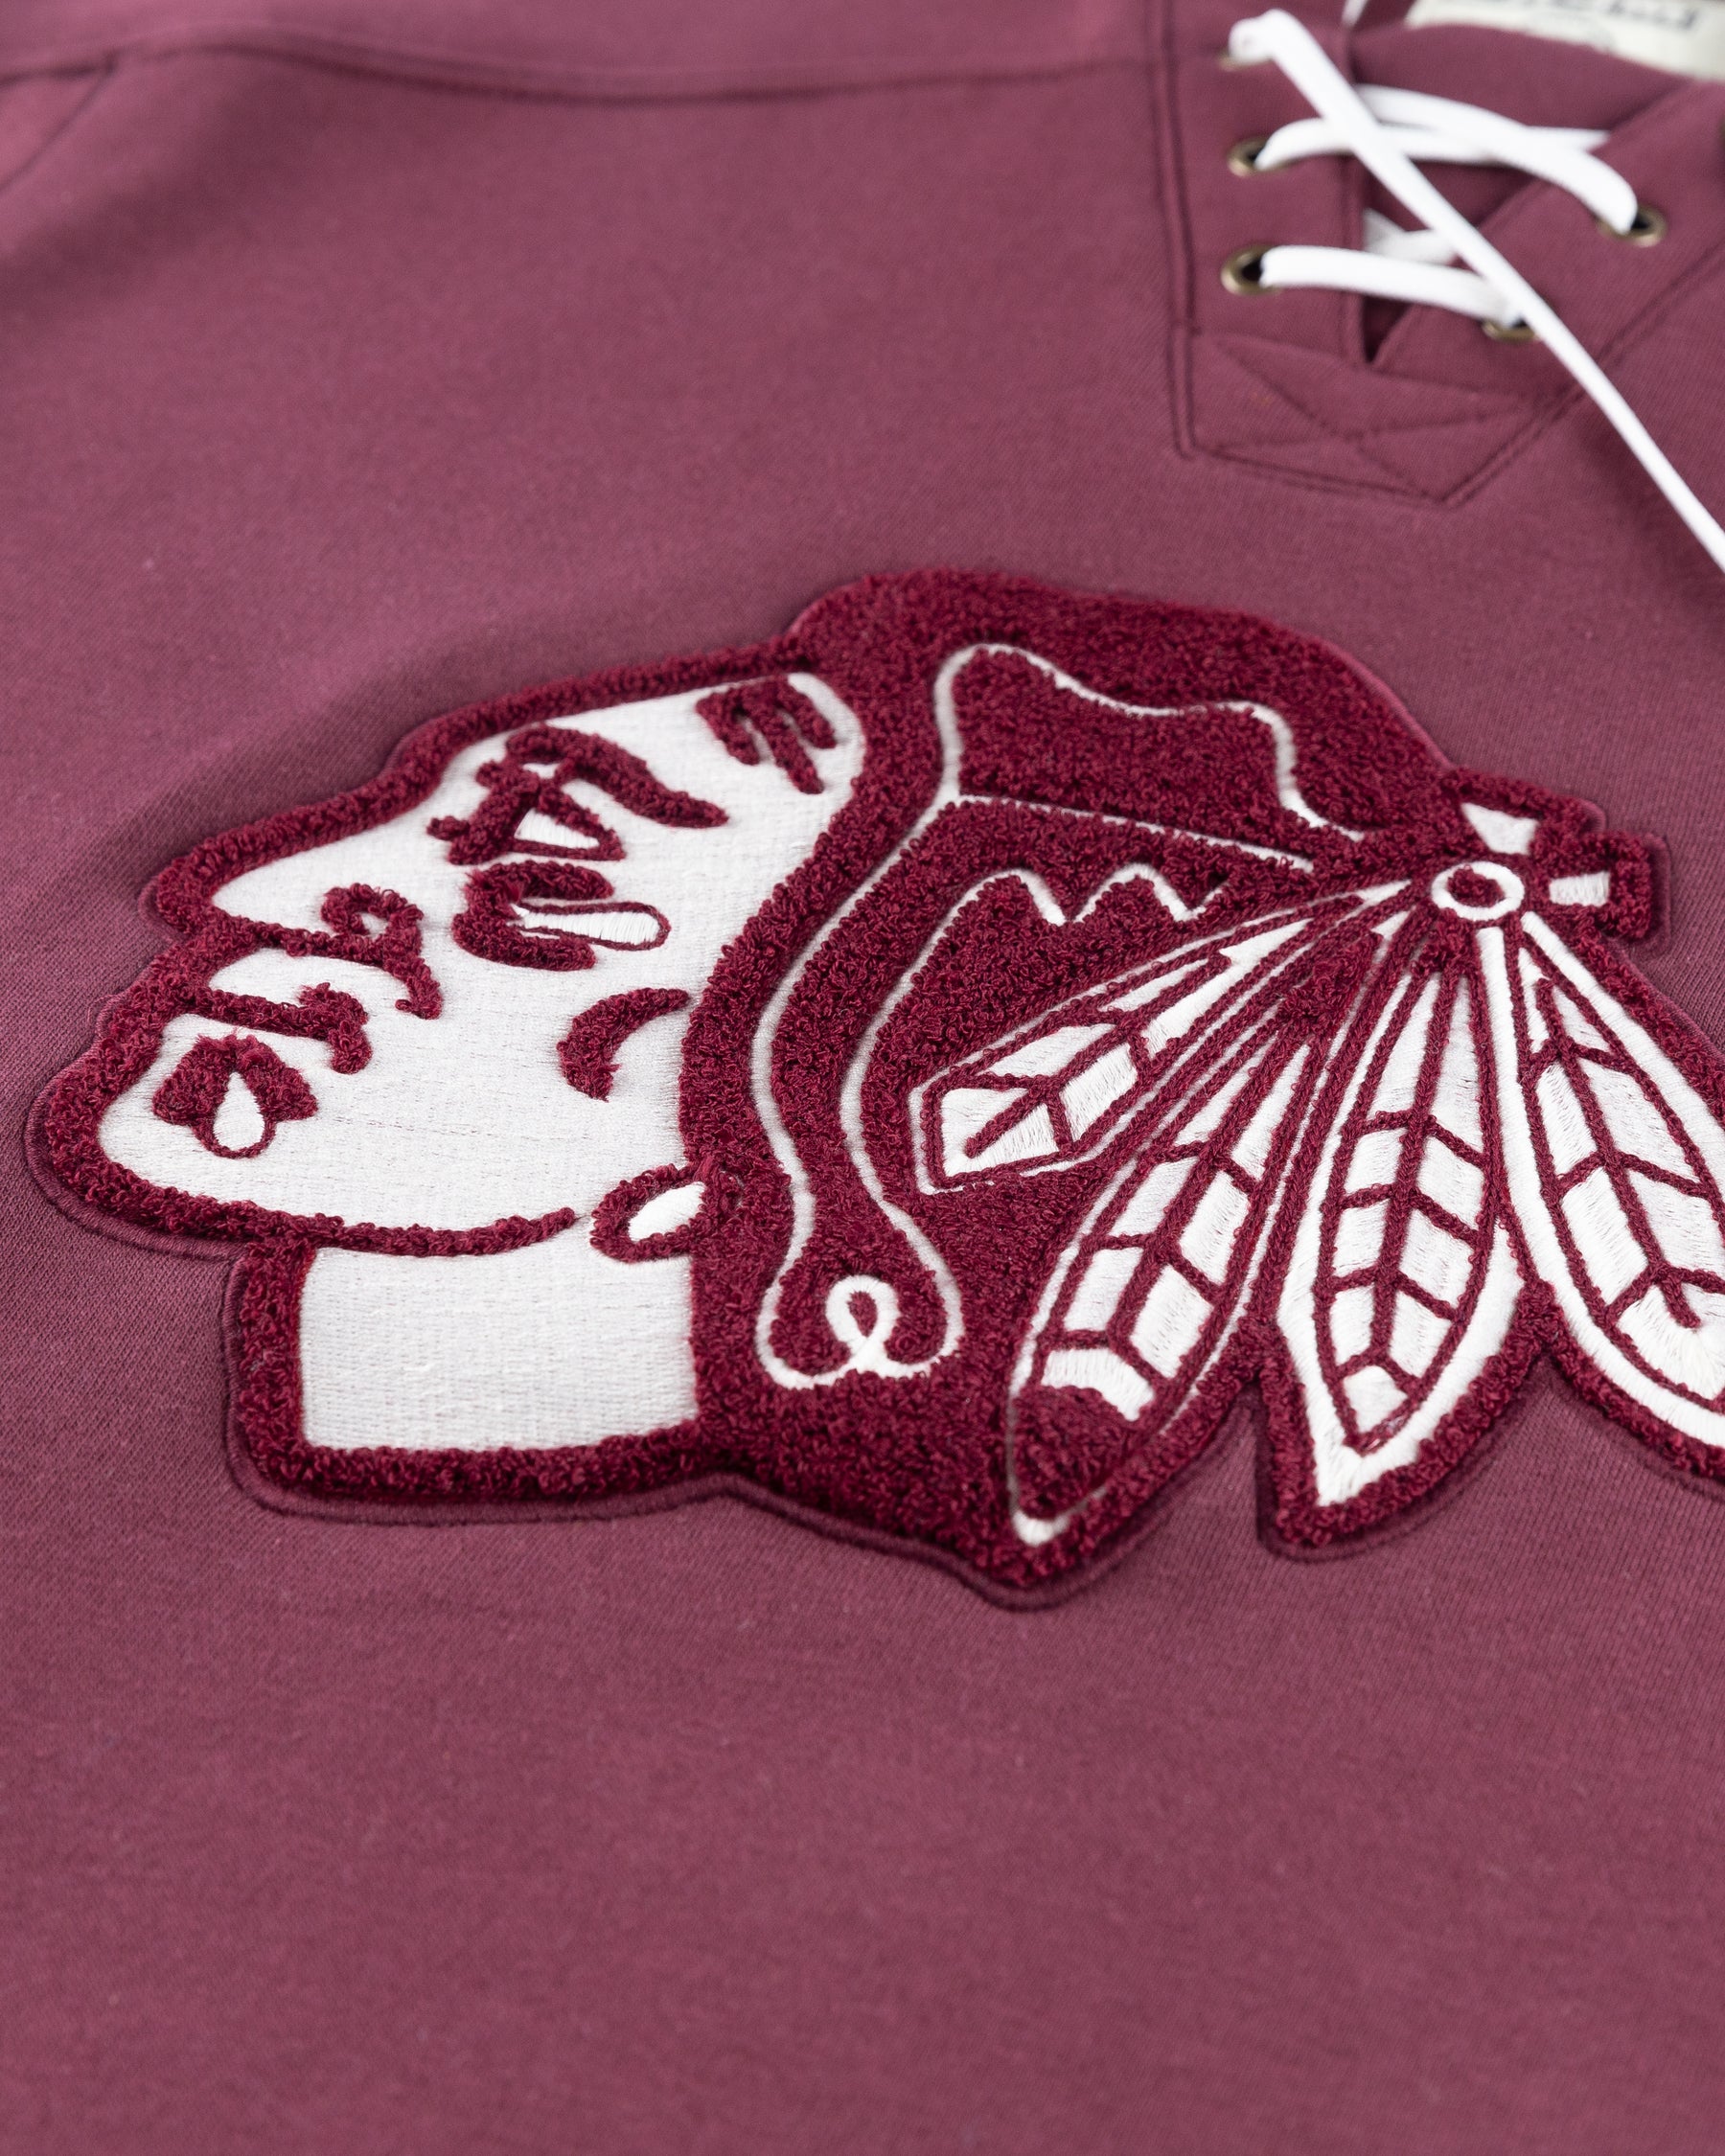 burgundy CCM lace up hoodie with hockey jersey inspired design and Chicago Blackhawks primary logo across front chest - detail lay flat